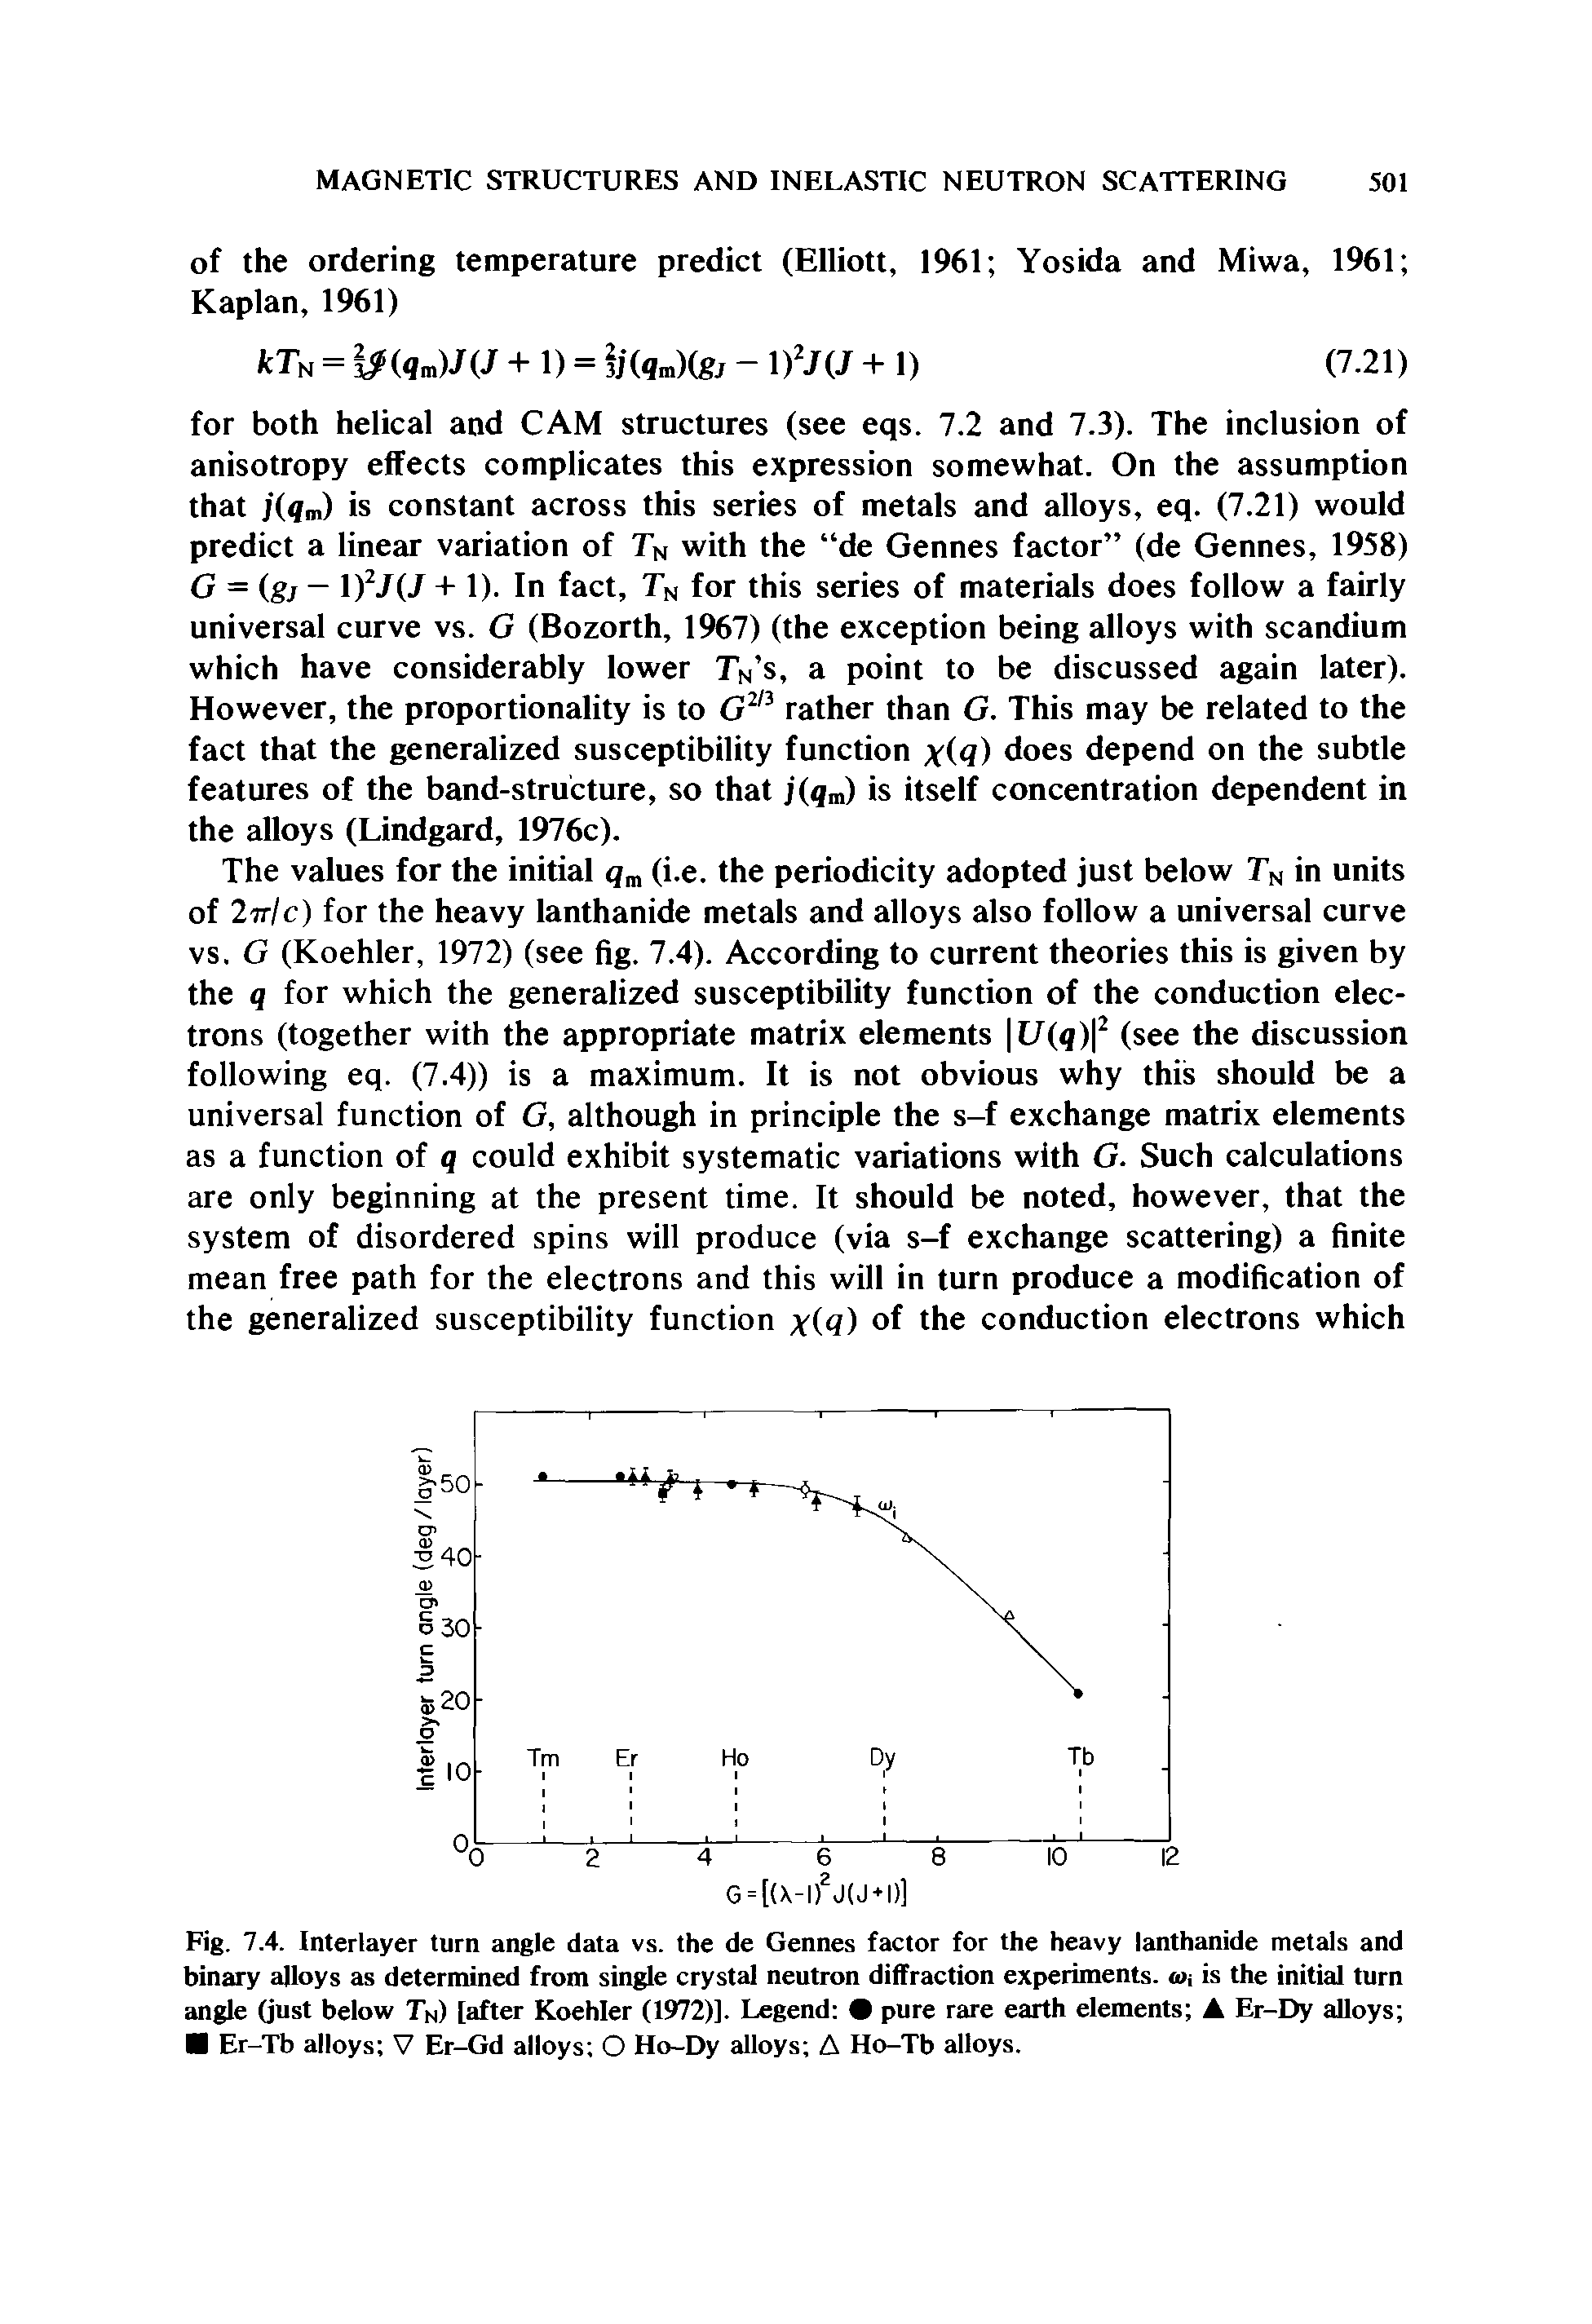 Fig. 7.4. Interlayer turn angle data vs. the de Gennes factor for the heavy lanthanide metals and binary alloys as determined from single crystal neutron diffraction experiments. o>i is the initial turn angle (just below Tn) [after Koehler (1972)]. Legend pure rare earth elements A Er-Dy alloys Er-Tb alloys V Er-Gd alloys O Ho-Dy alloys A Ho-Tb alloys.